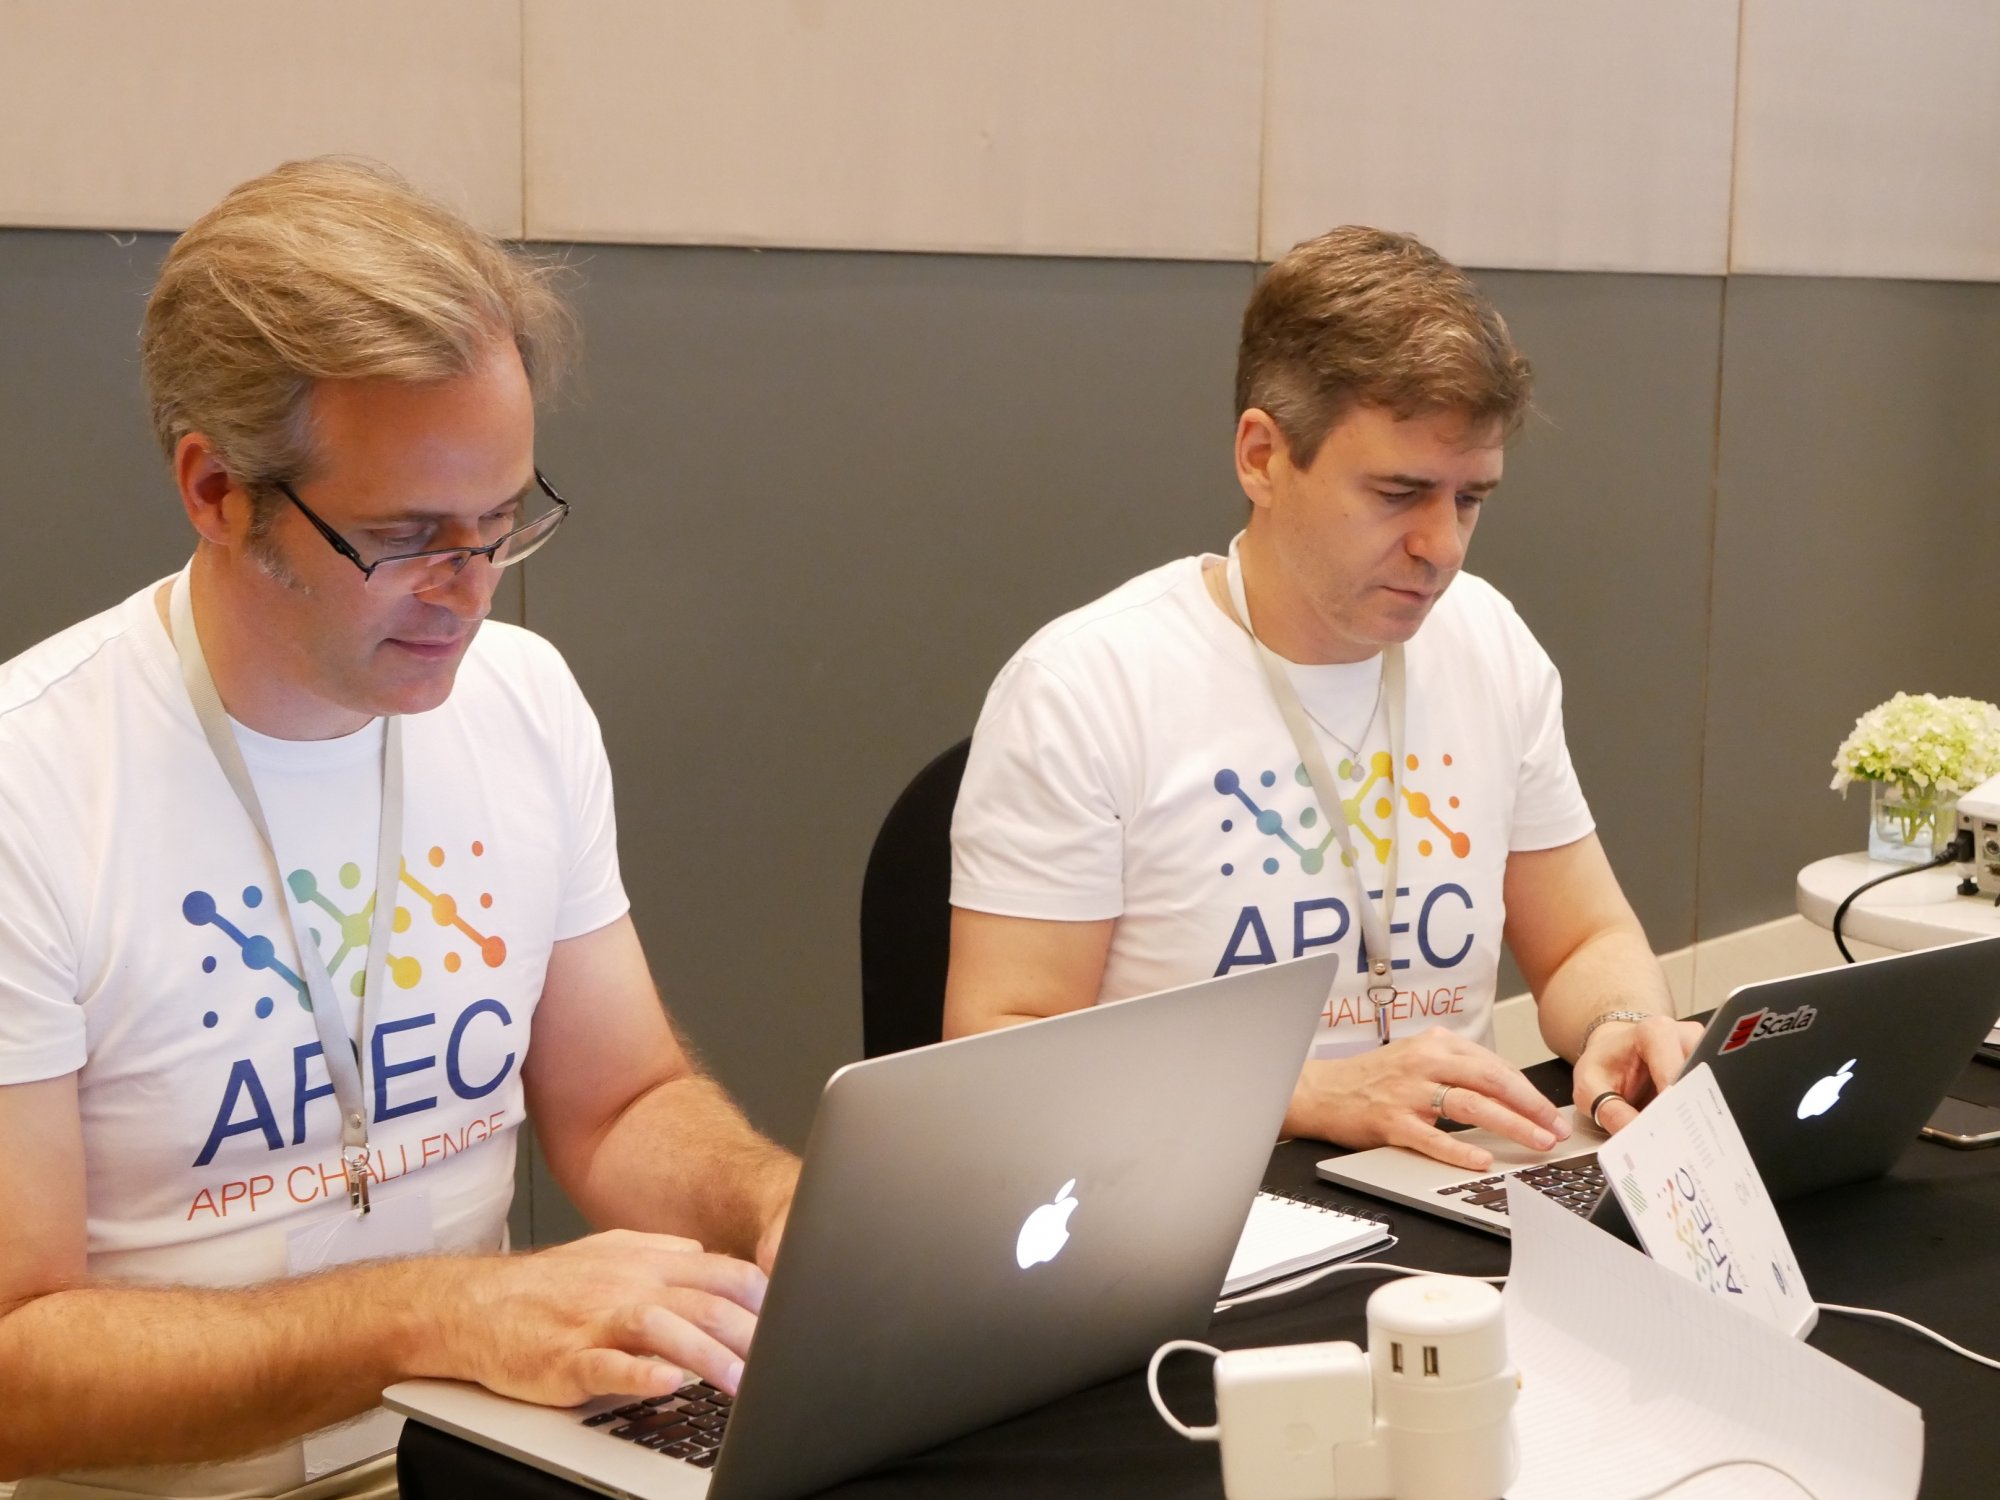 Two Canberra IT experts hit the world stage with APEC App Challenge win